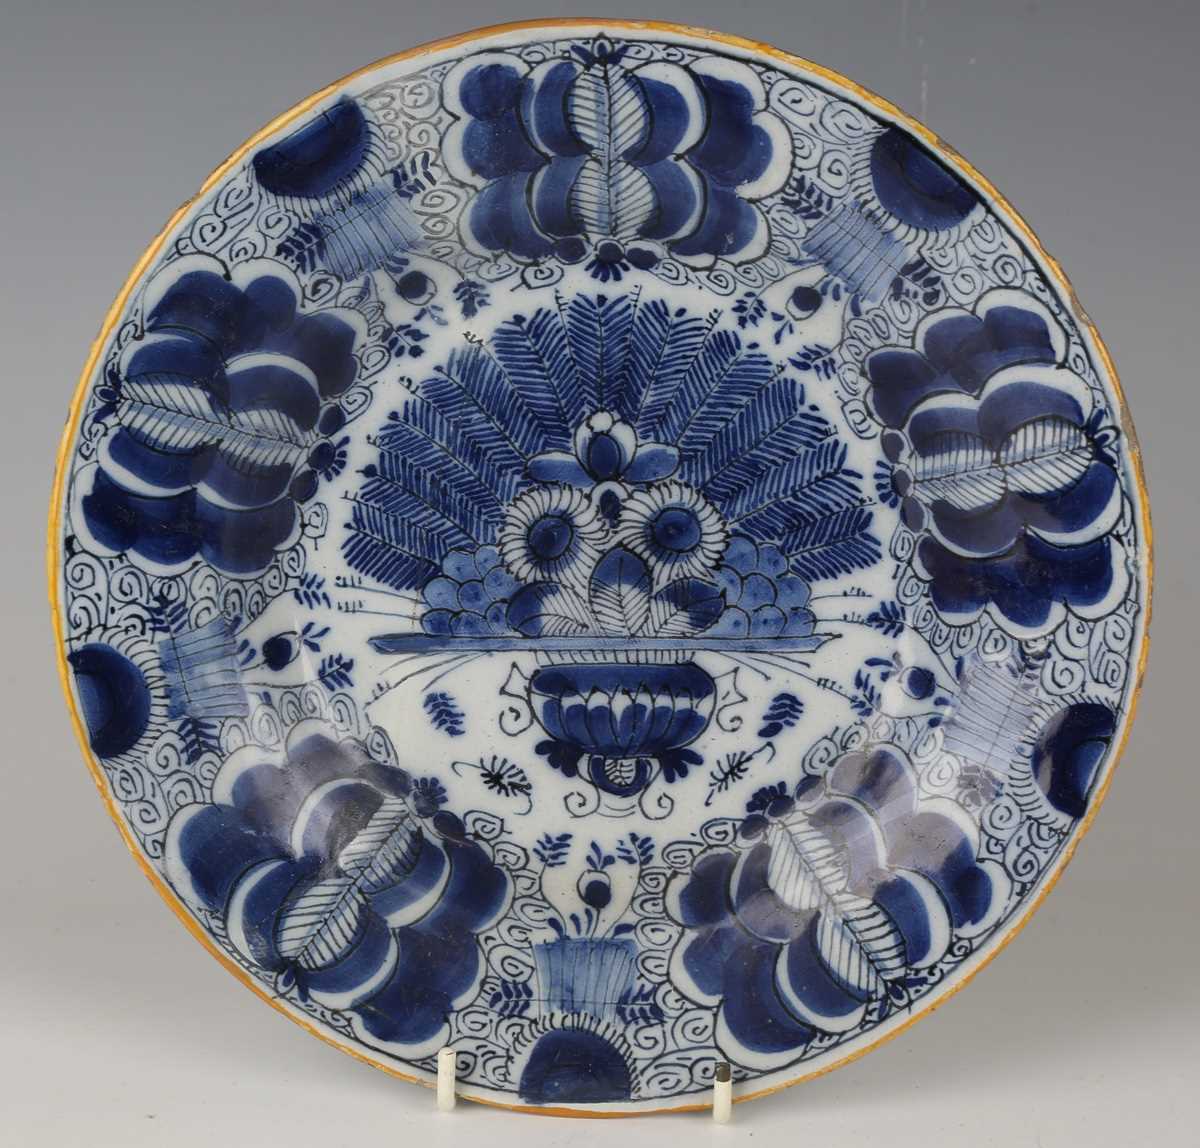 A Dutch delft Peacock pattern plate by De Porceleyne Claeuw, 18th century, painted in blue within an - Image 7 of 8